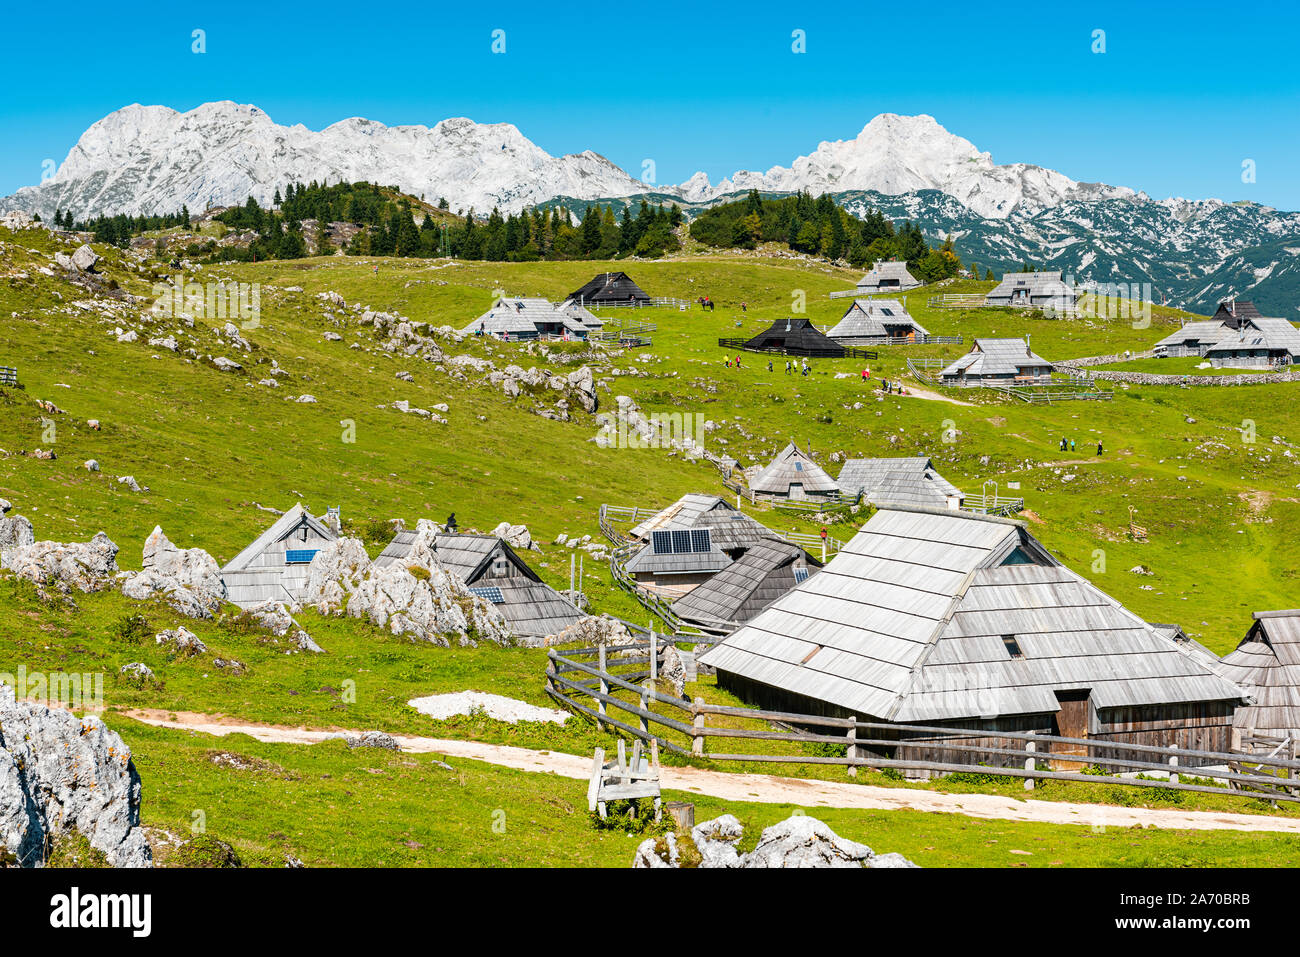 Big Pasture Plateau or Velika Planina in Slovenia. traditional Wooden Shepherd Shelters in Mountains. Stock Photo